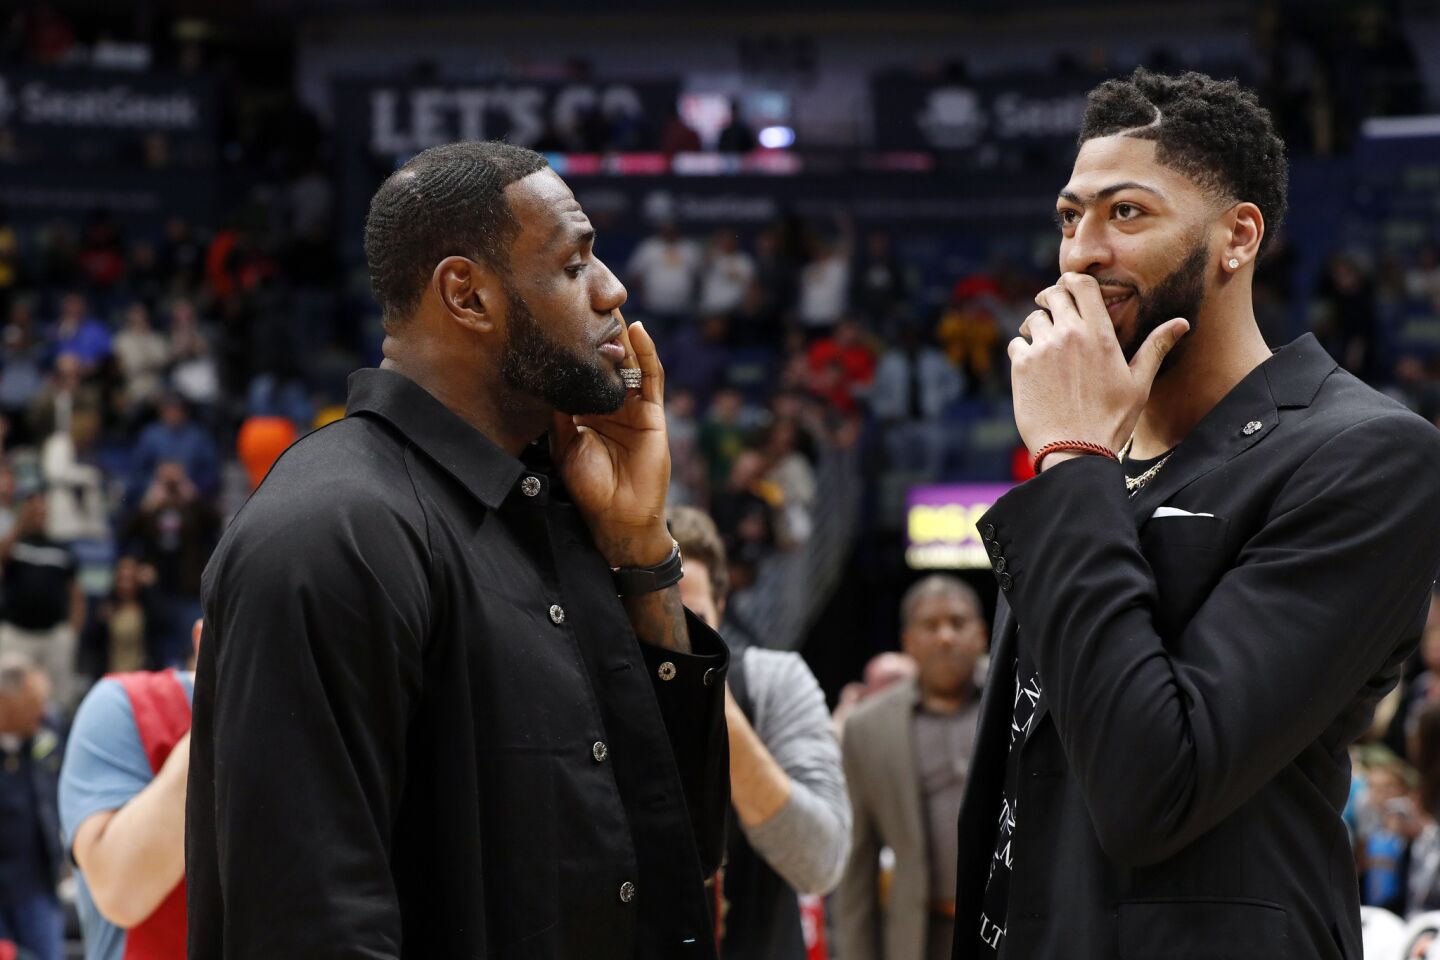 Lakers forward LeBron James and Pelicans forward Anthony Davis after a March game in New Orleans. The Lakers won 130-102.